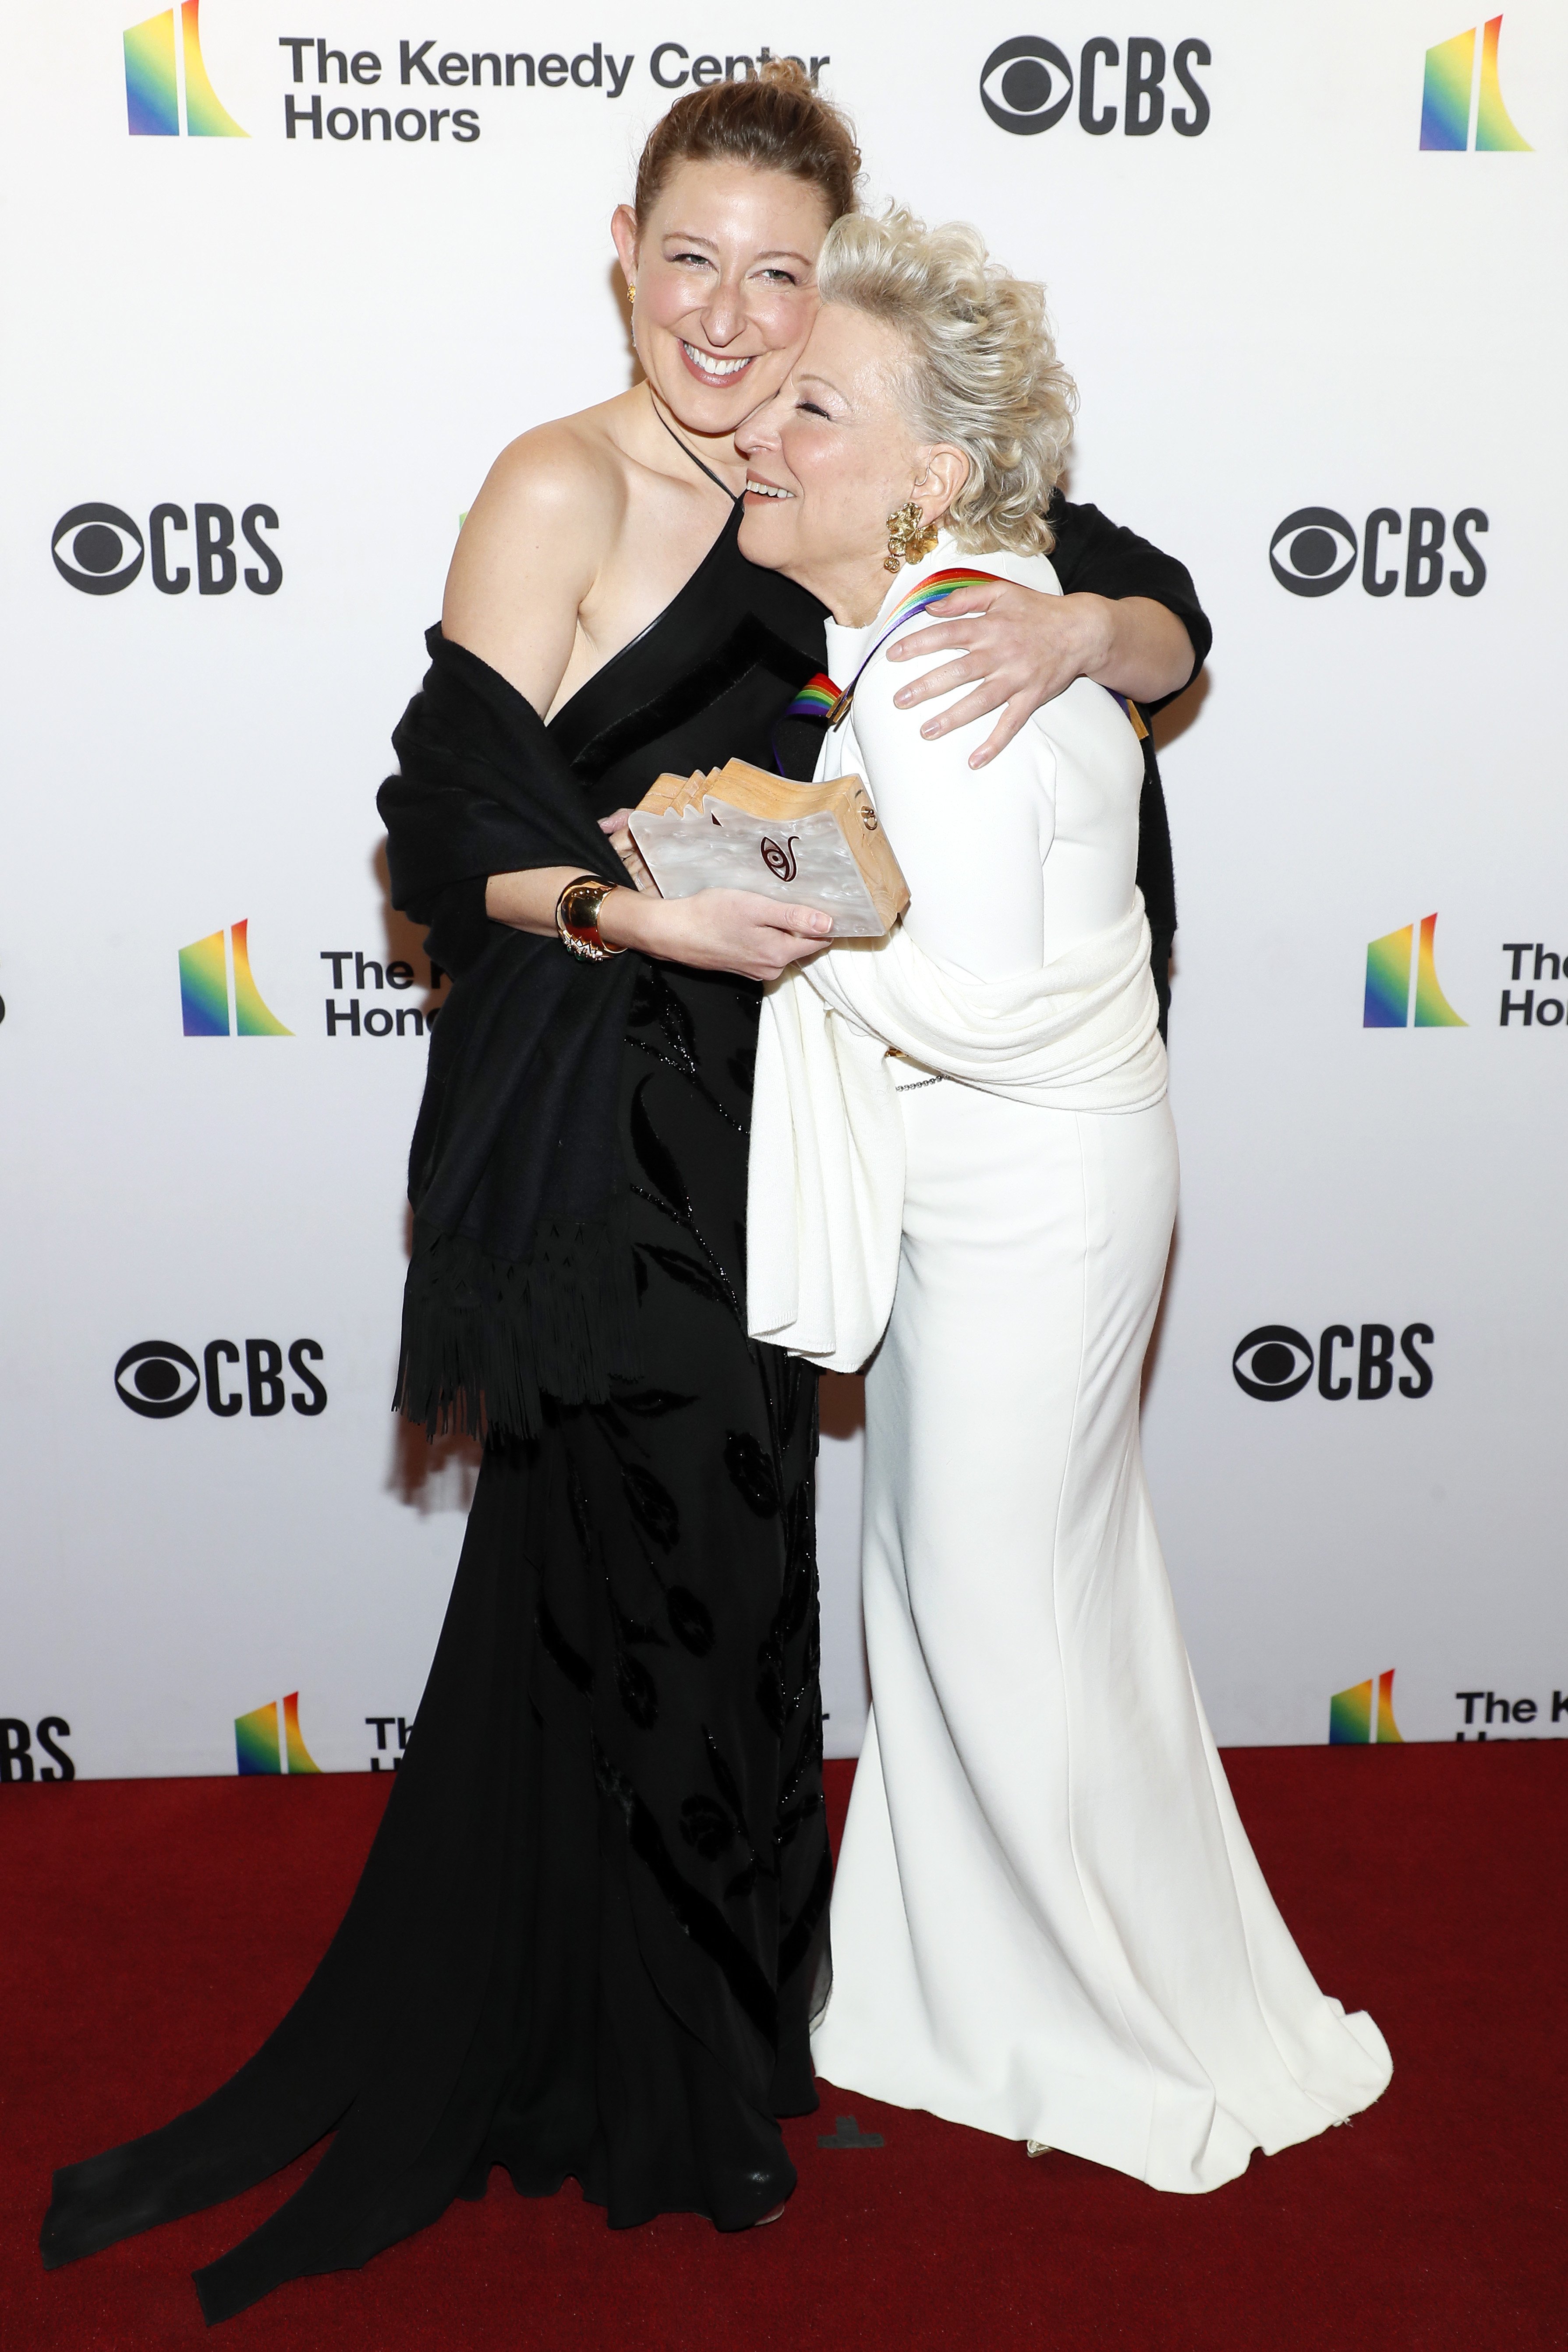 Honoree Bette Midler and daughter Sophie Von Haselberg at the 44th Kennedy Center Honors at The Kennedy Center on December 05, 2021 in Washington, DC | Source: Getty Images